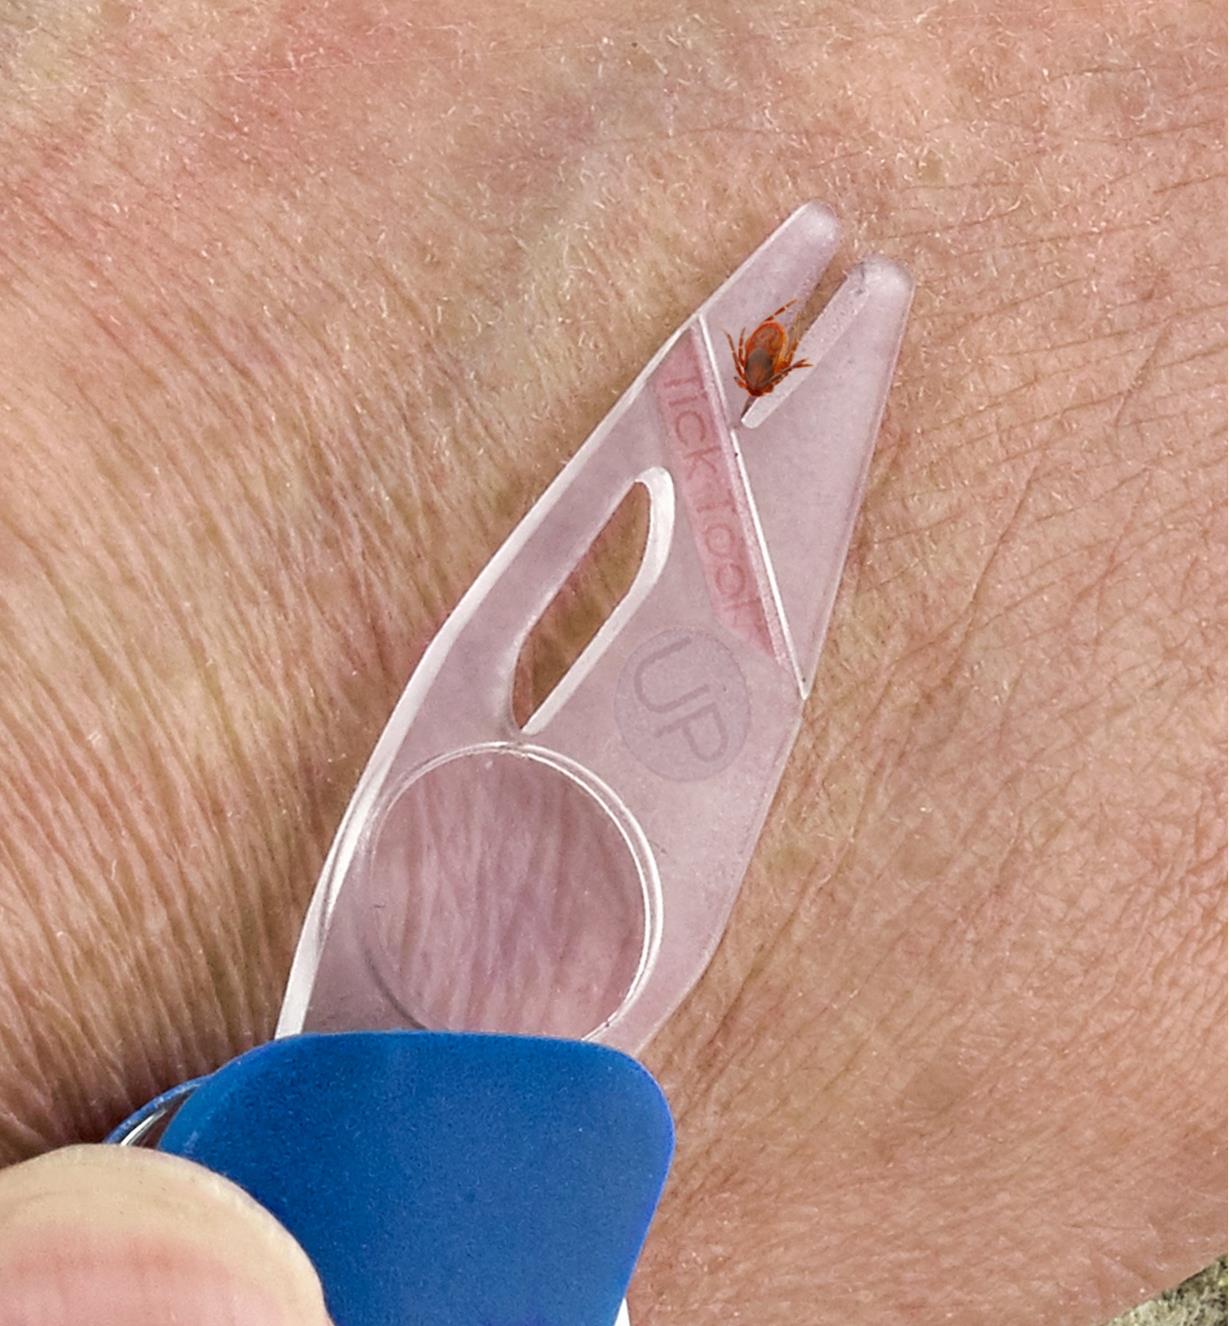 Dislodging a tick from skin with the tick remove